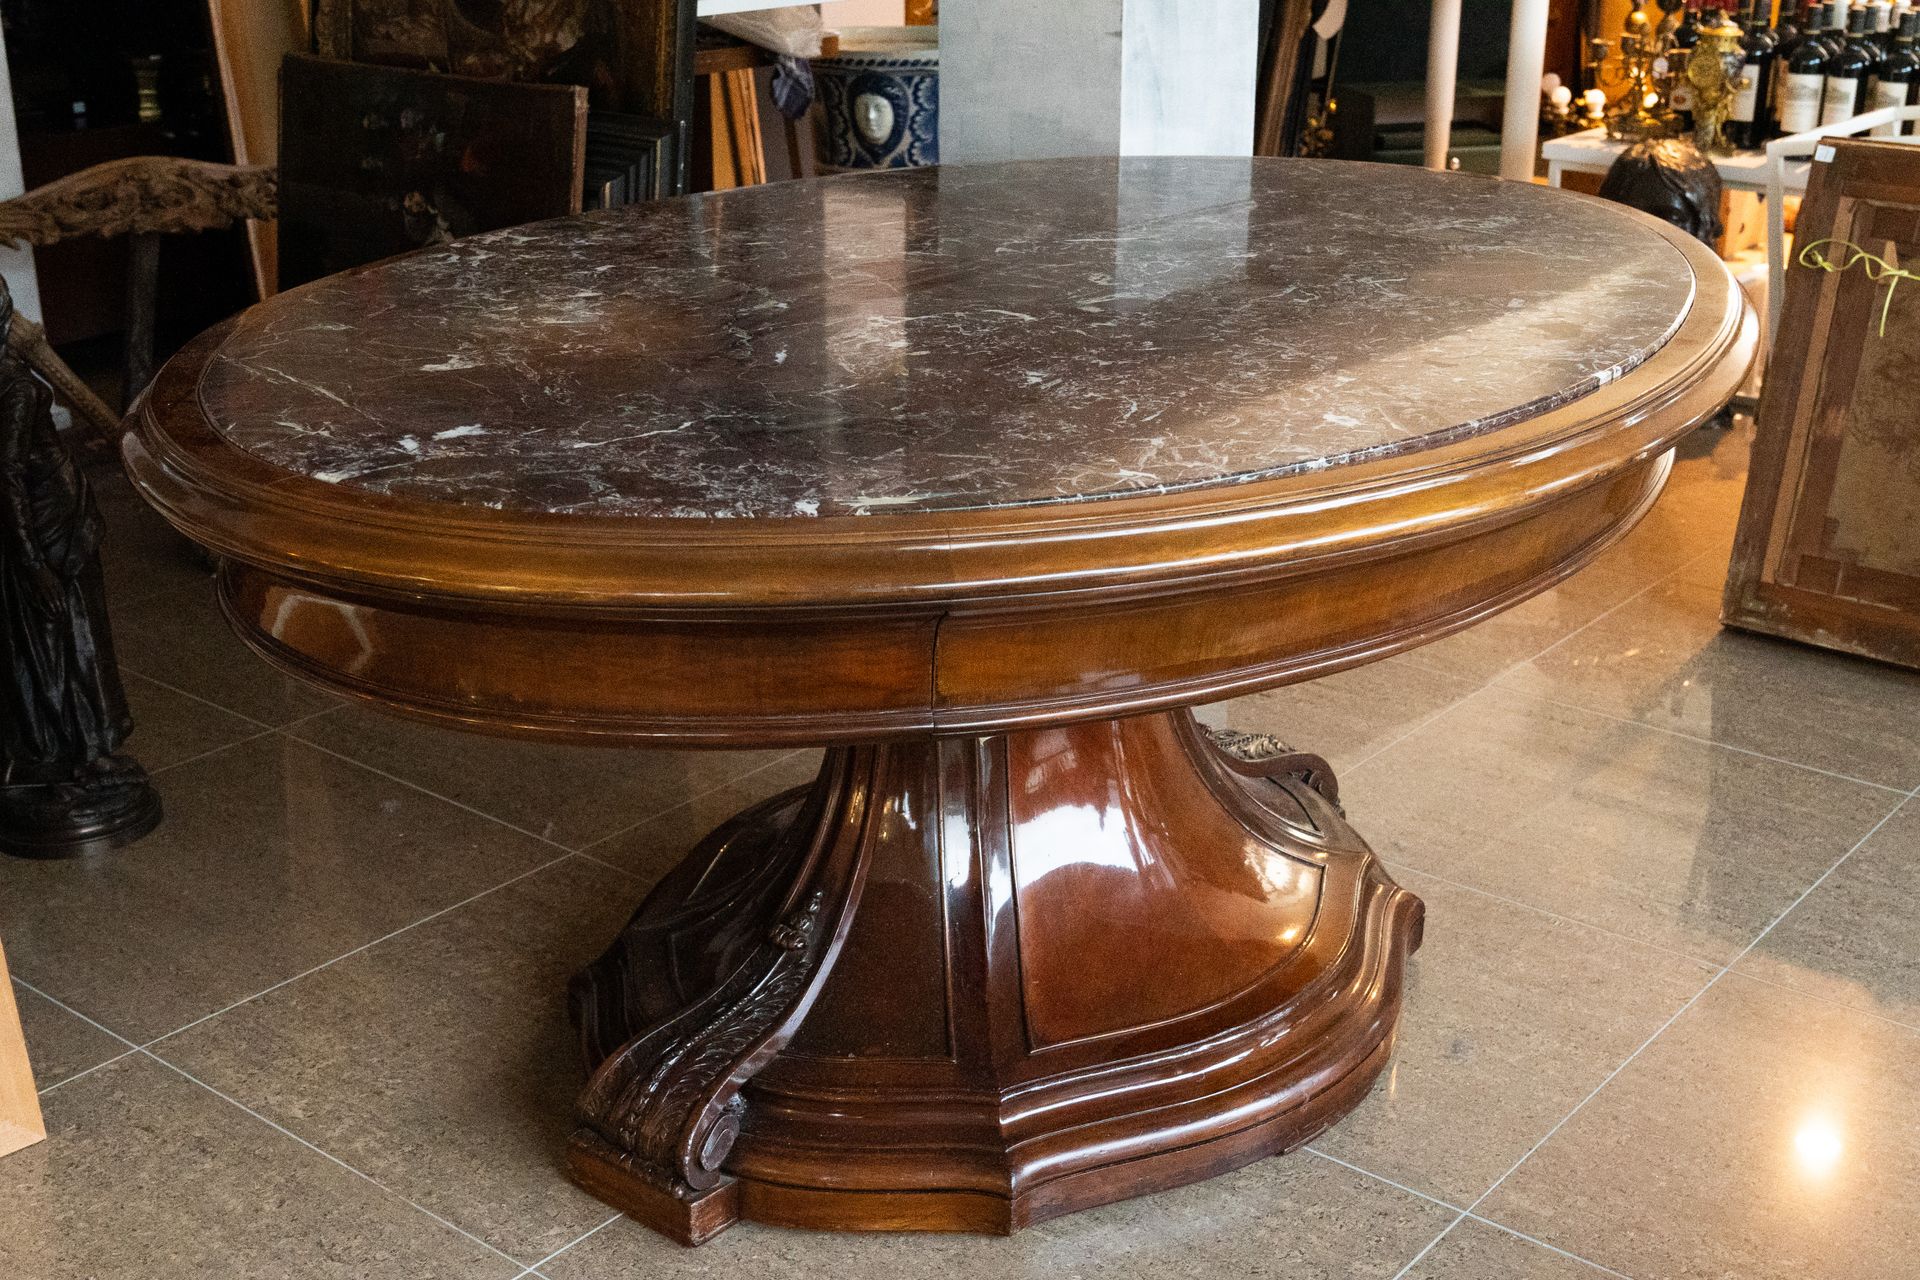 An impressive oval English mahogany table with marble top, 19th C. Impressionnan&hellip;